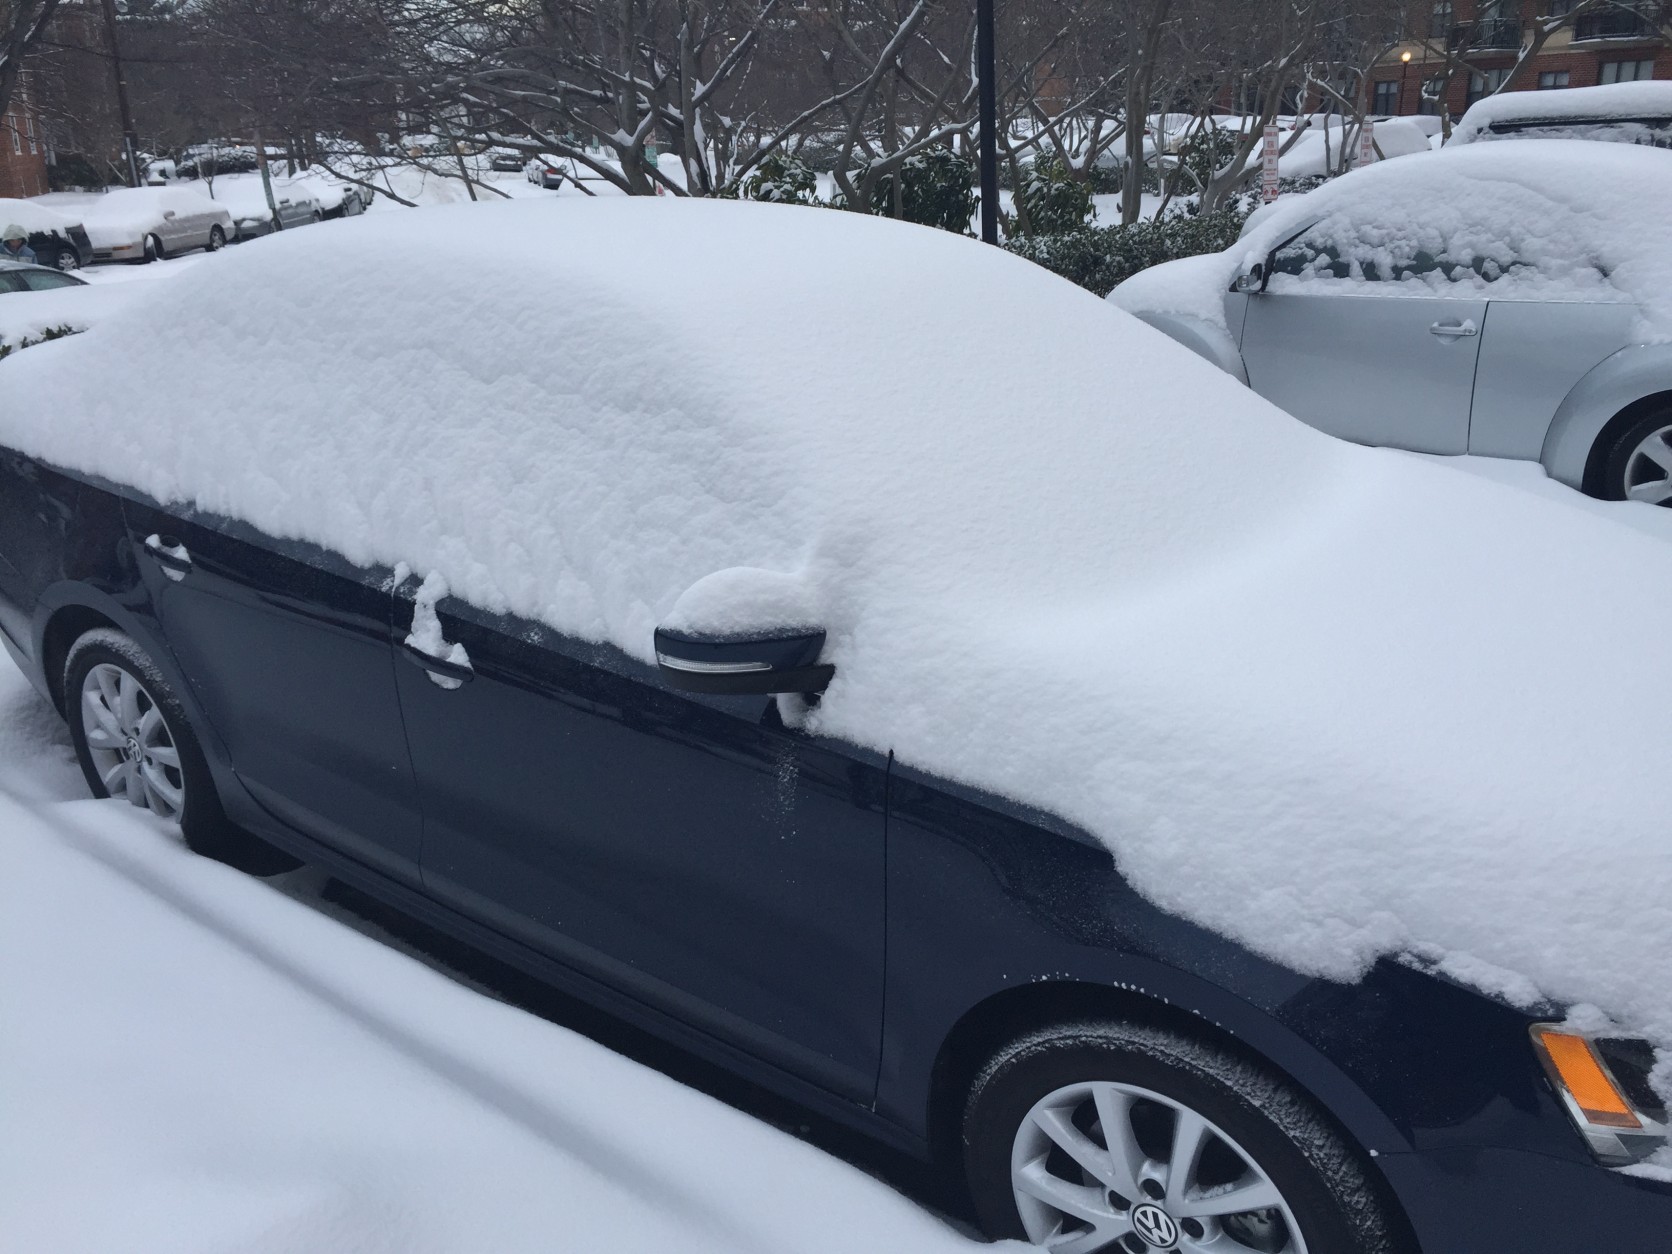 Snowy cars are parked in a D.C. parking lot Tuesday morning. (WTOP/Neal Augenstein)